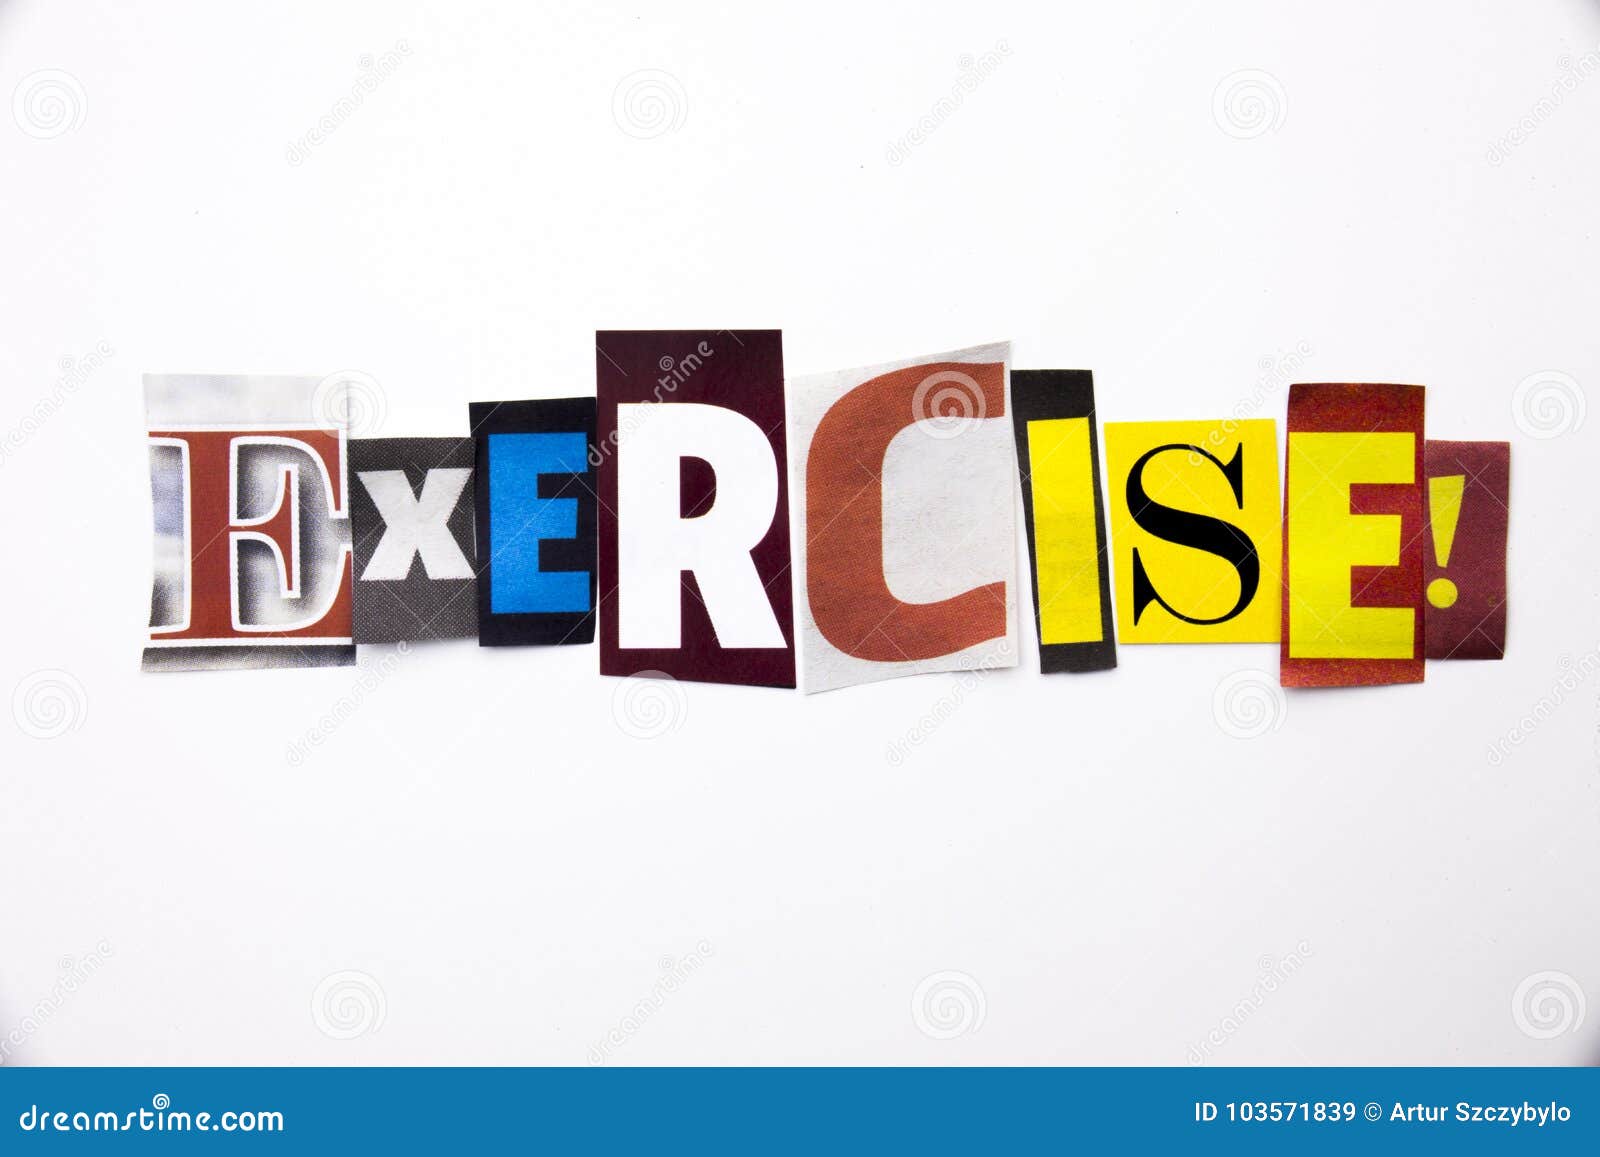 https://thumbs.dreamstime.com/z/word-writing-text-showing-concept-exercise-workout-made-different-magazine-newspaper-letter-business-case-white-103571839.jpg